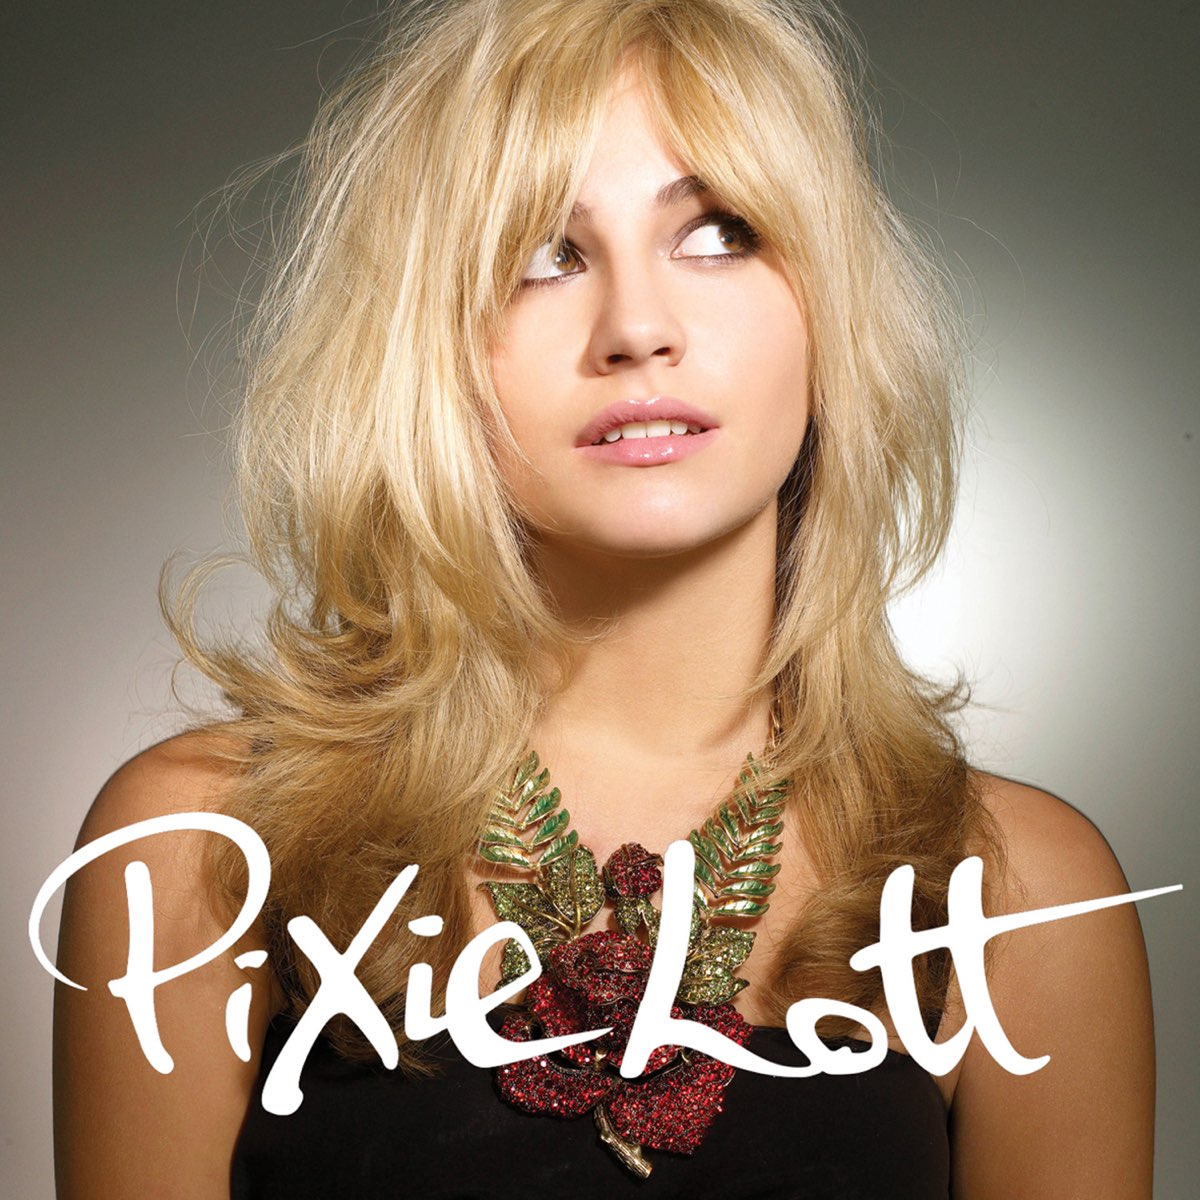 Pixie Lott — The Way the World Works cover artwork